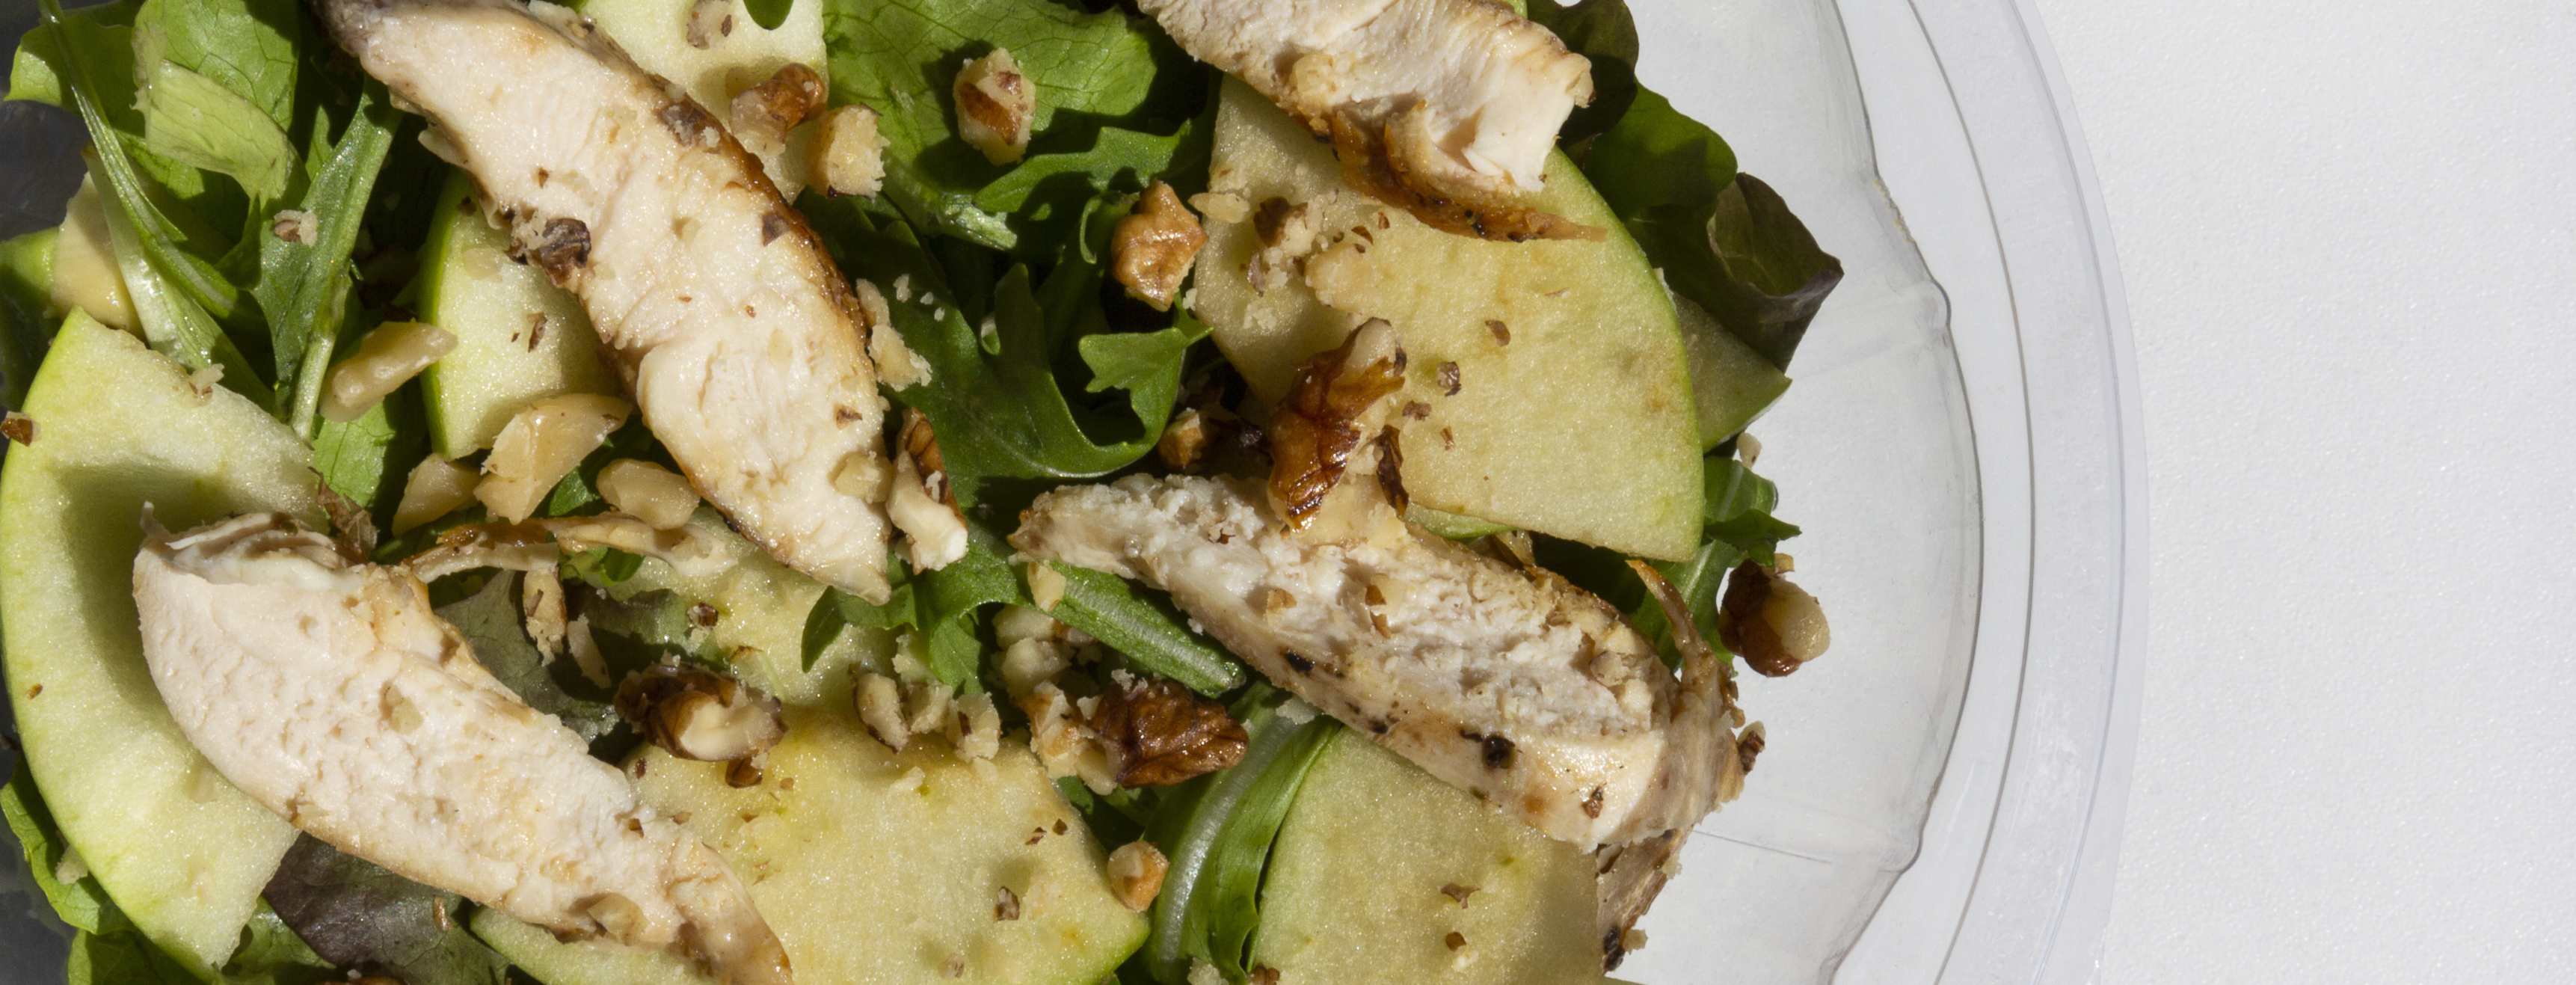 Chicken Salad with Nuts